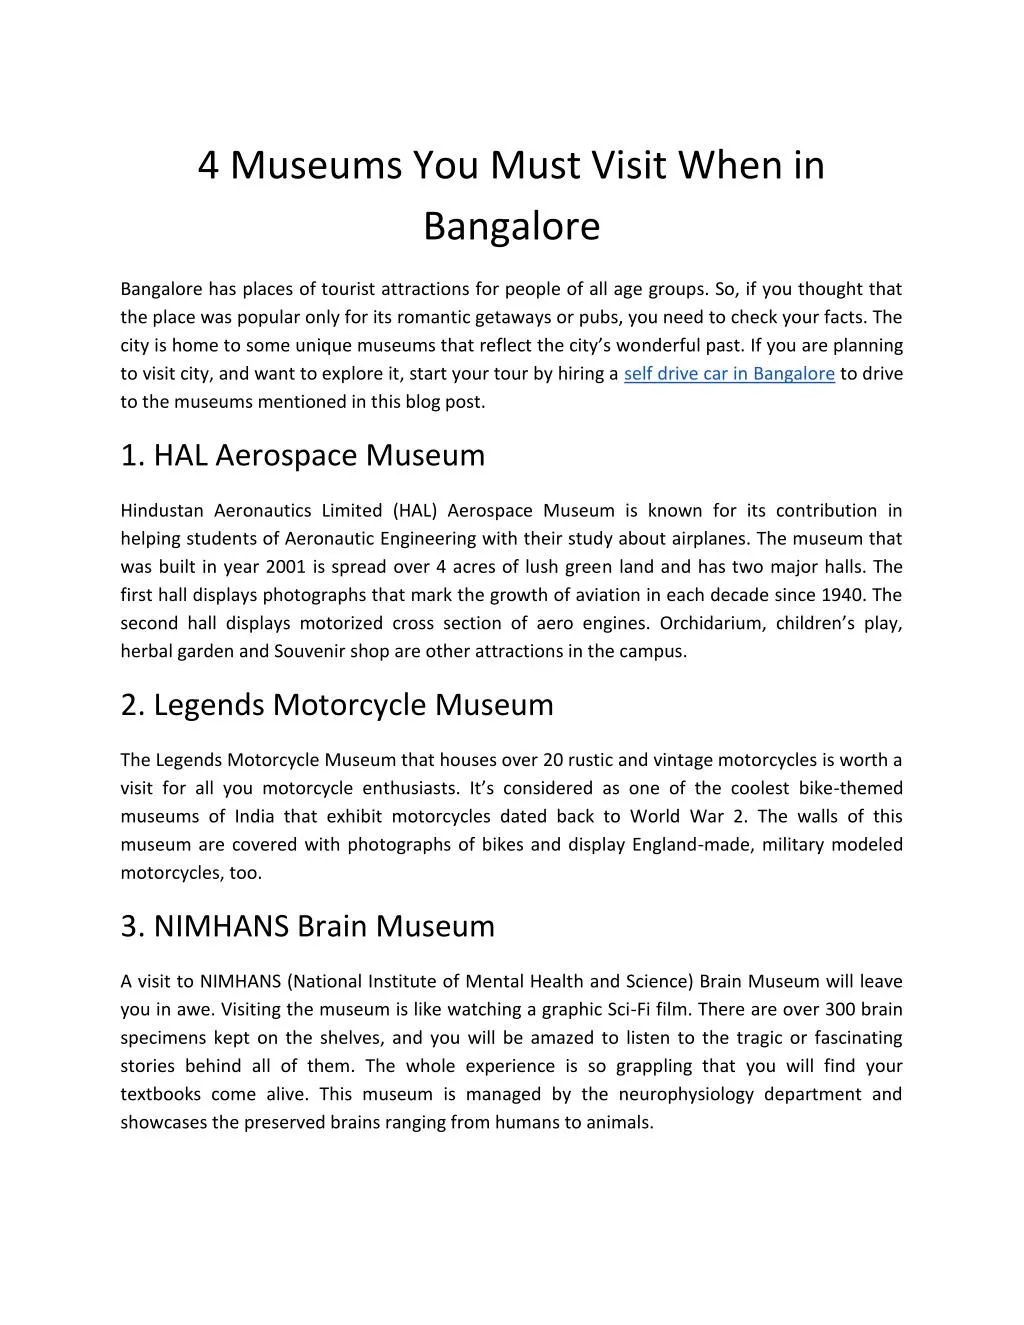 4 museums you must visit when in bangalore